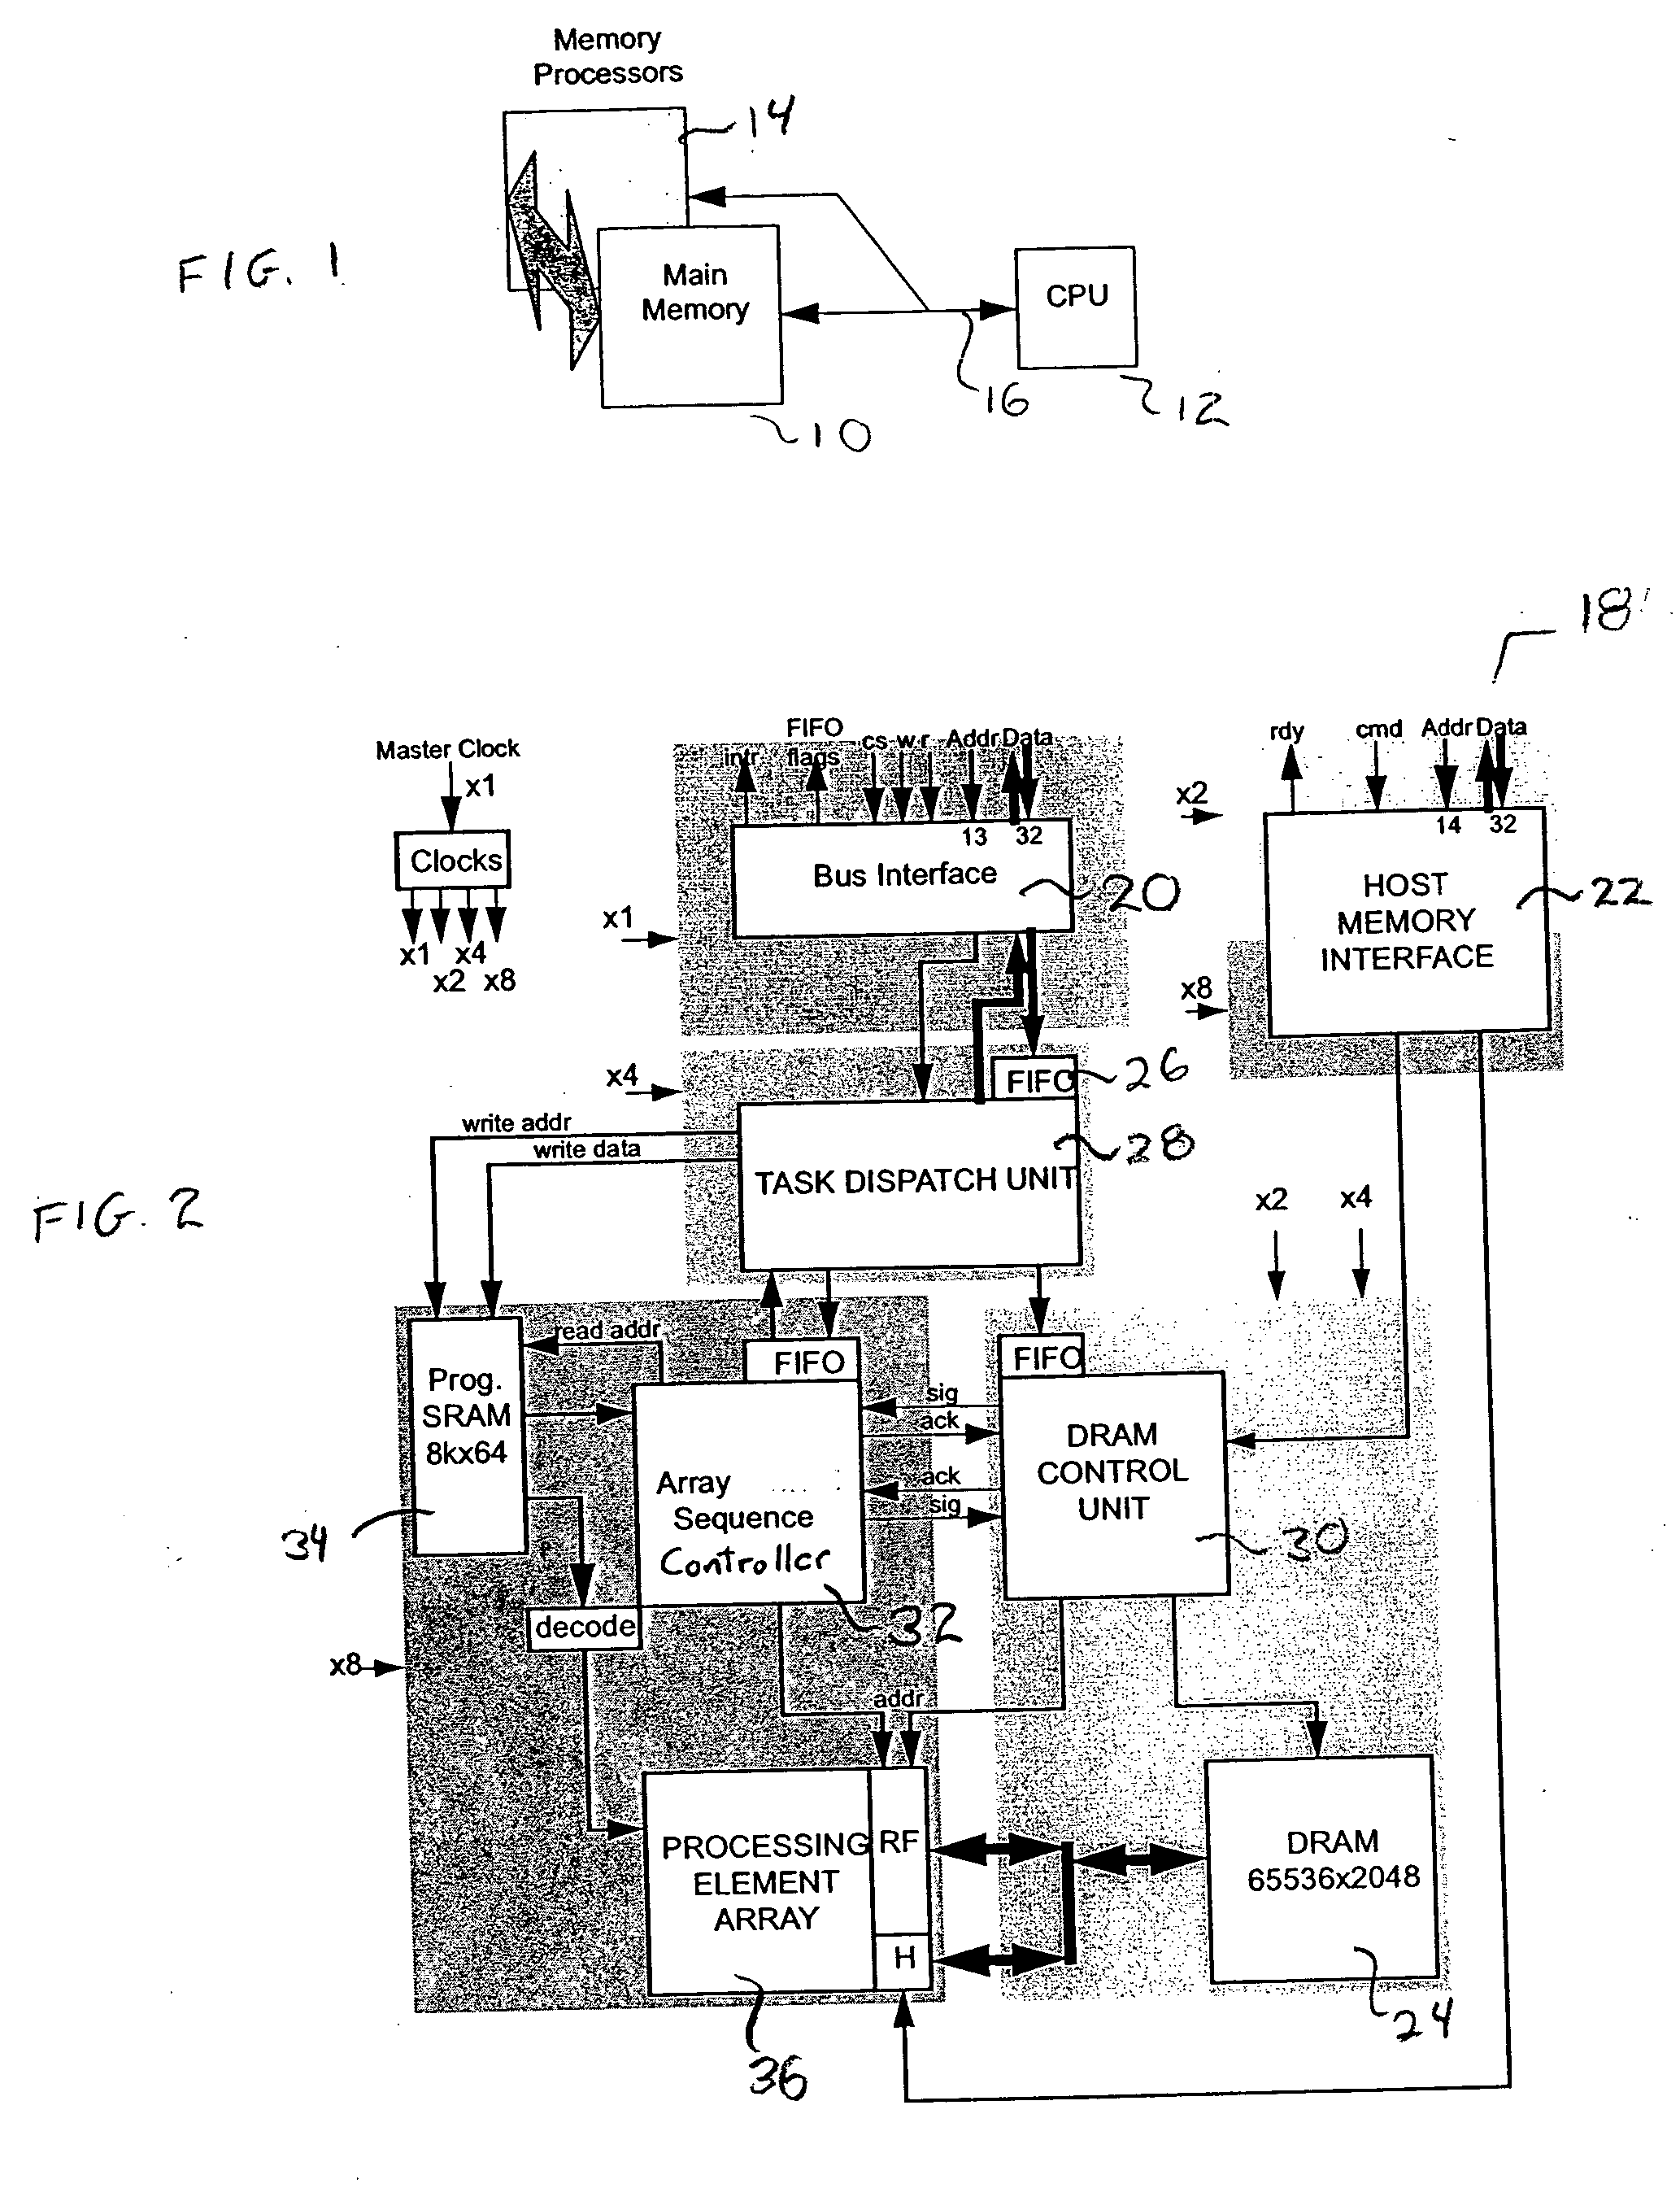 Method for manipulating data in a group of processing elements